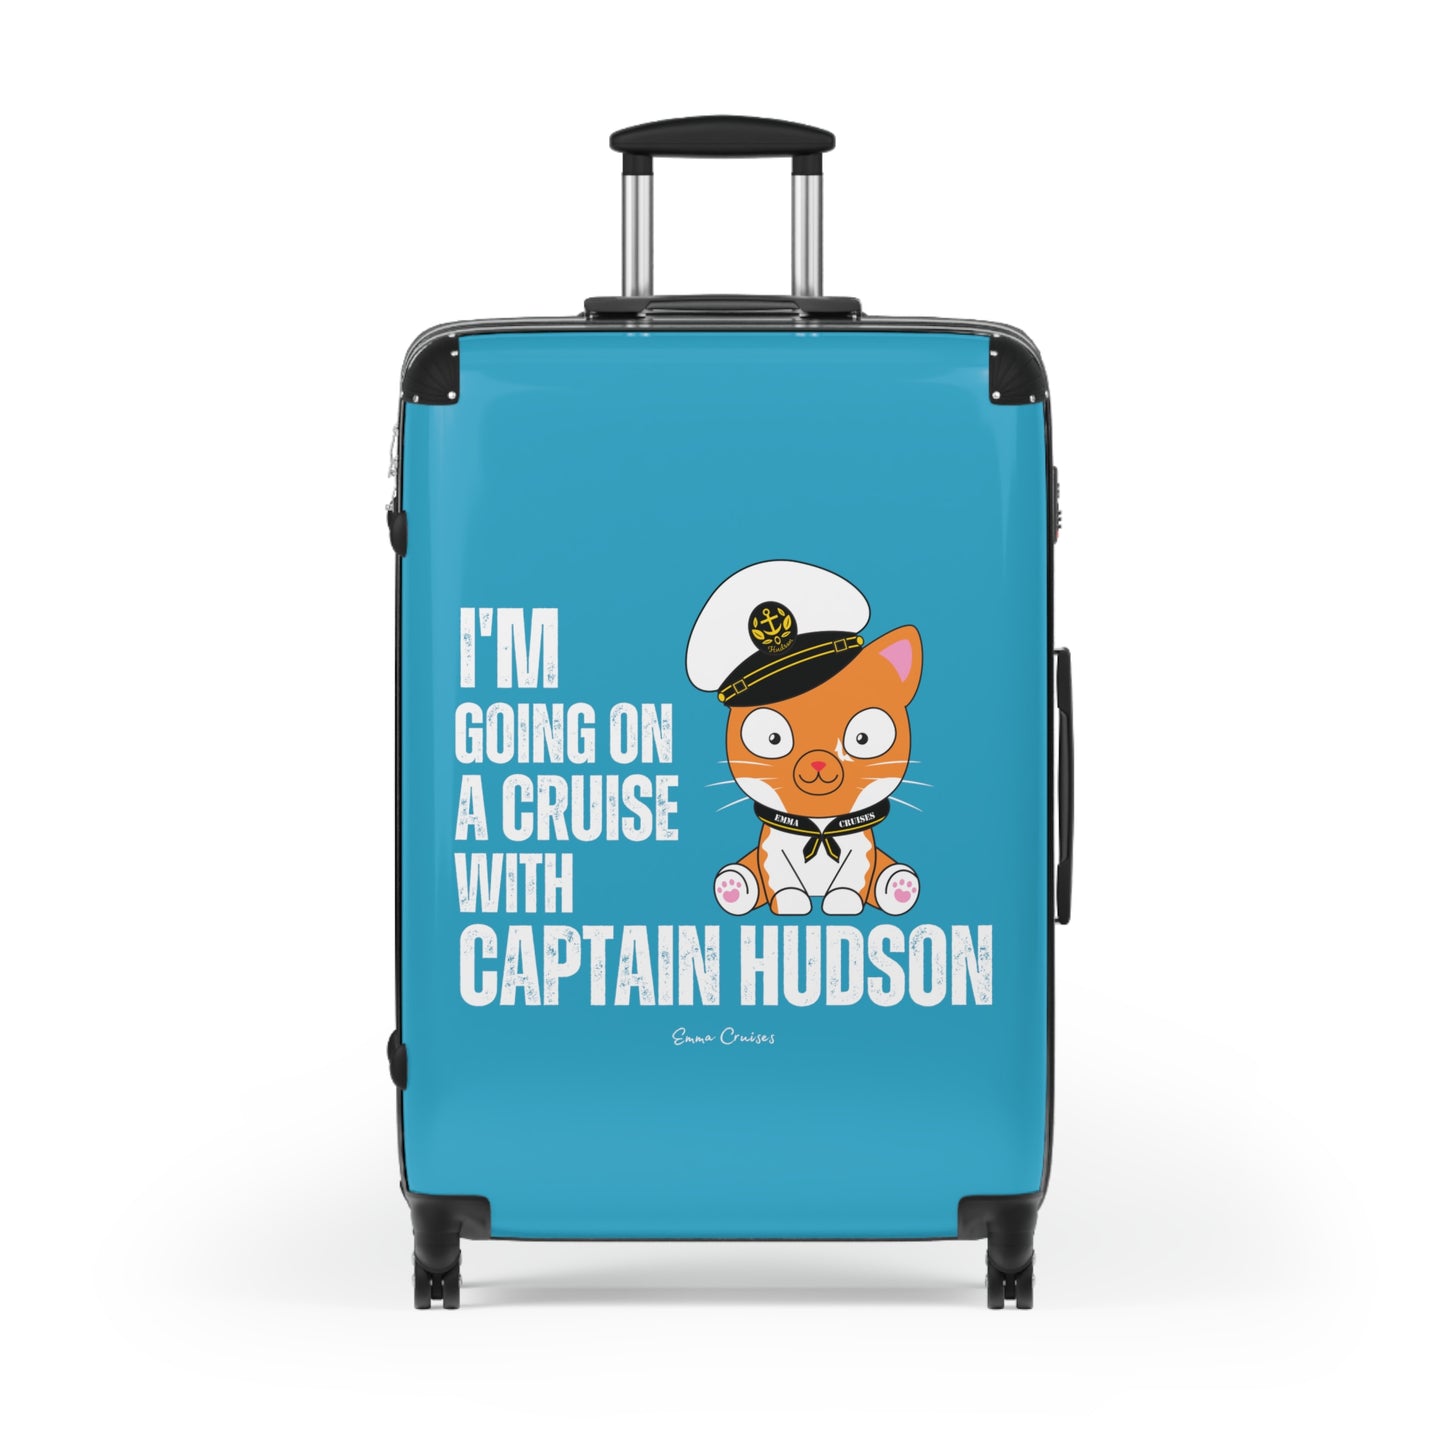 I'm Going on a Cruise With Captain Hudson - Suitcase